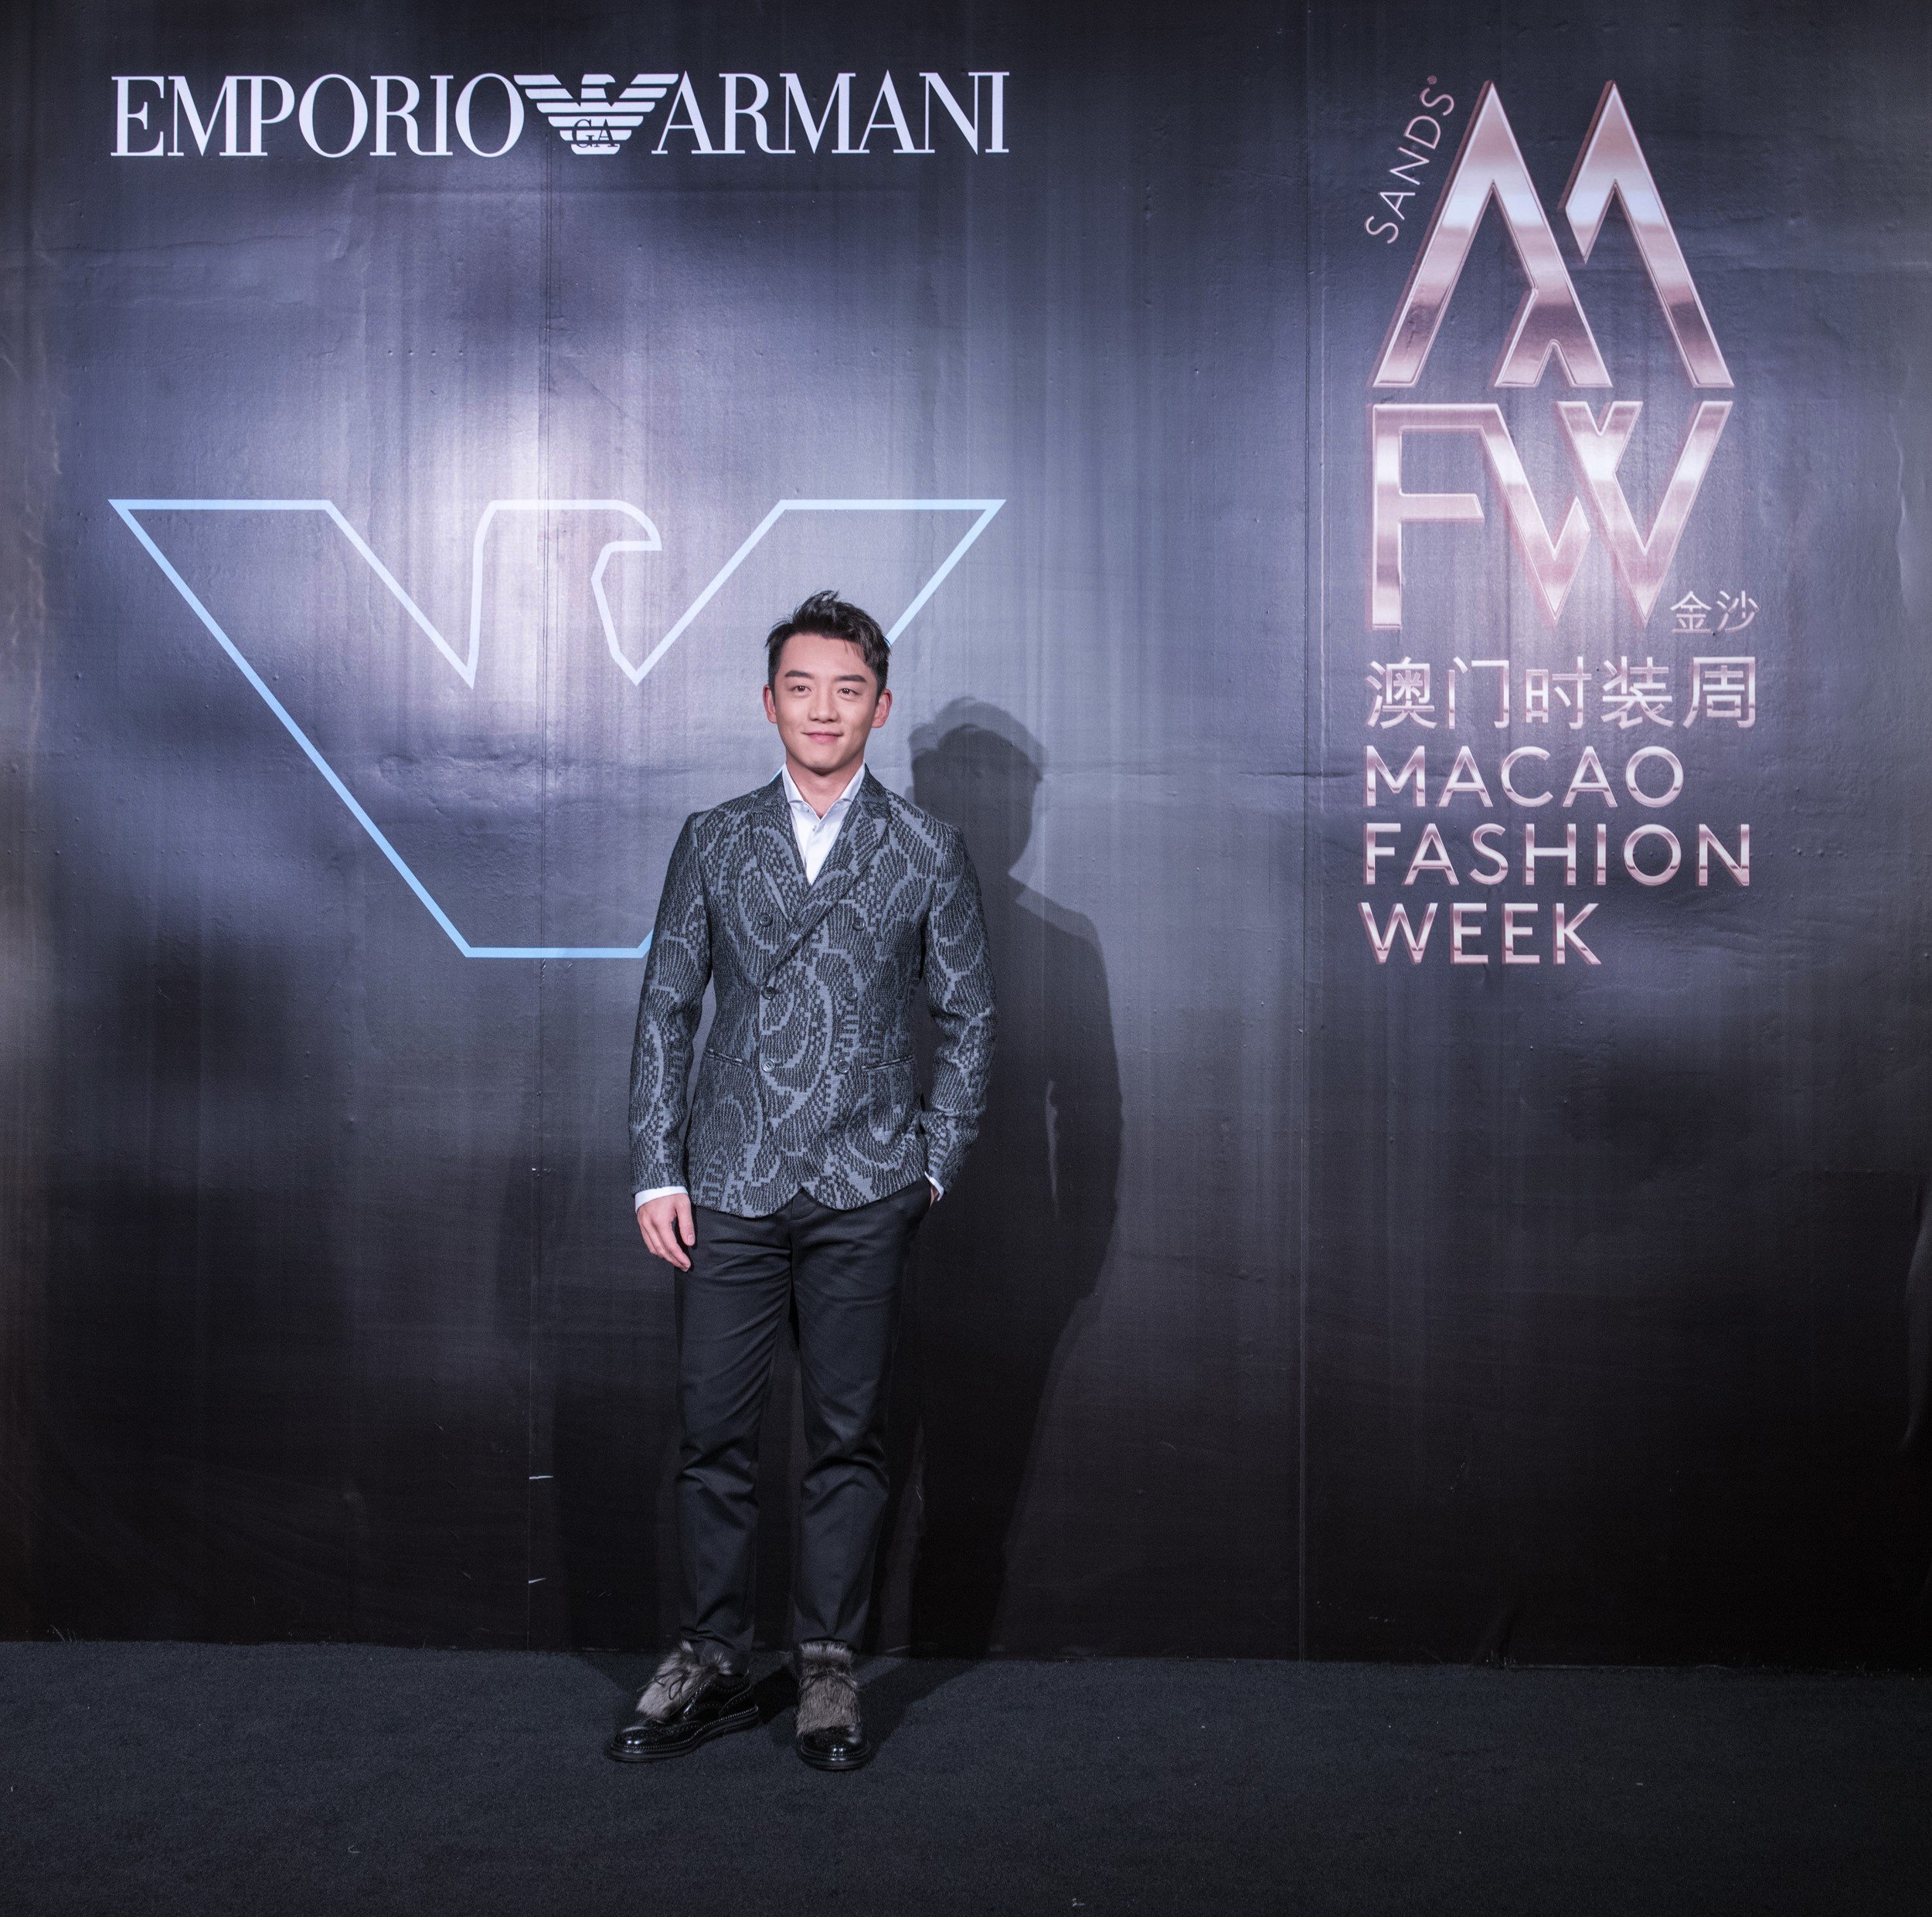 Zheng Kai was in the front row of the Emporio Armani show.